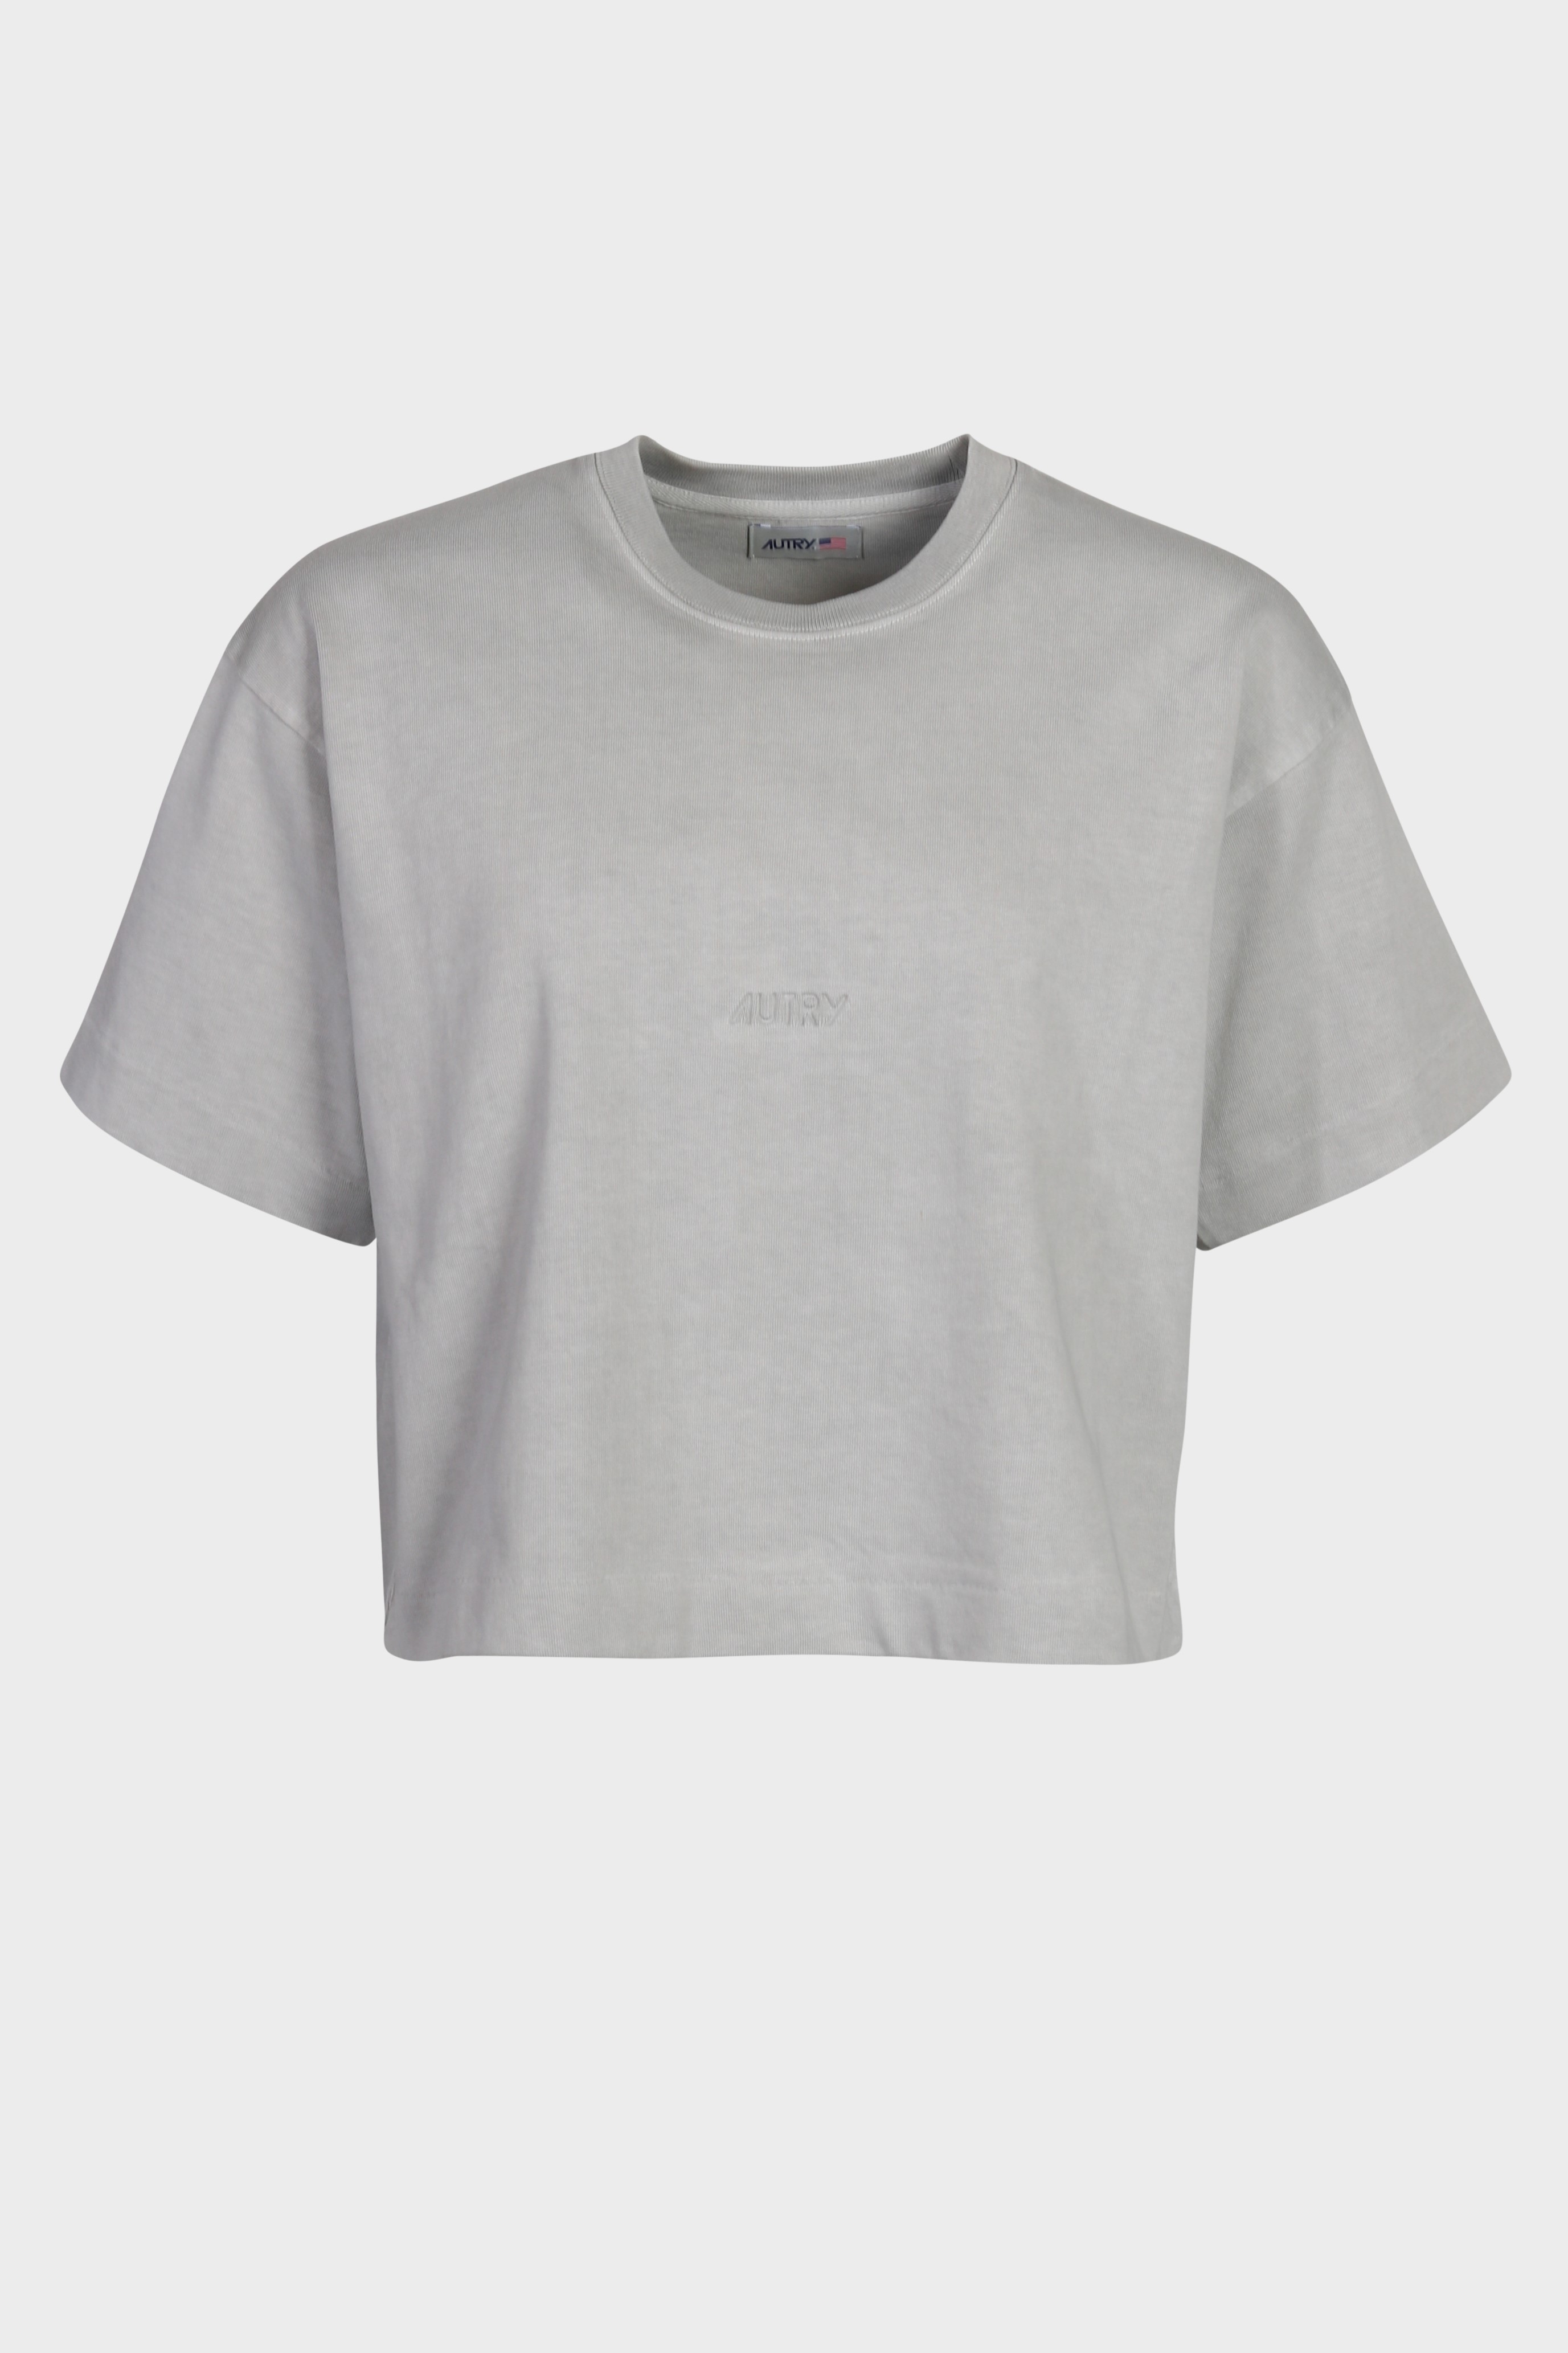 AUTRY ACTION PEOPLE Apparel T-Shirt in Grey